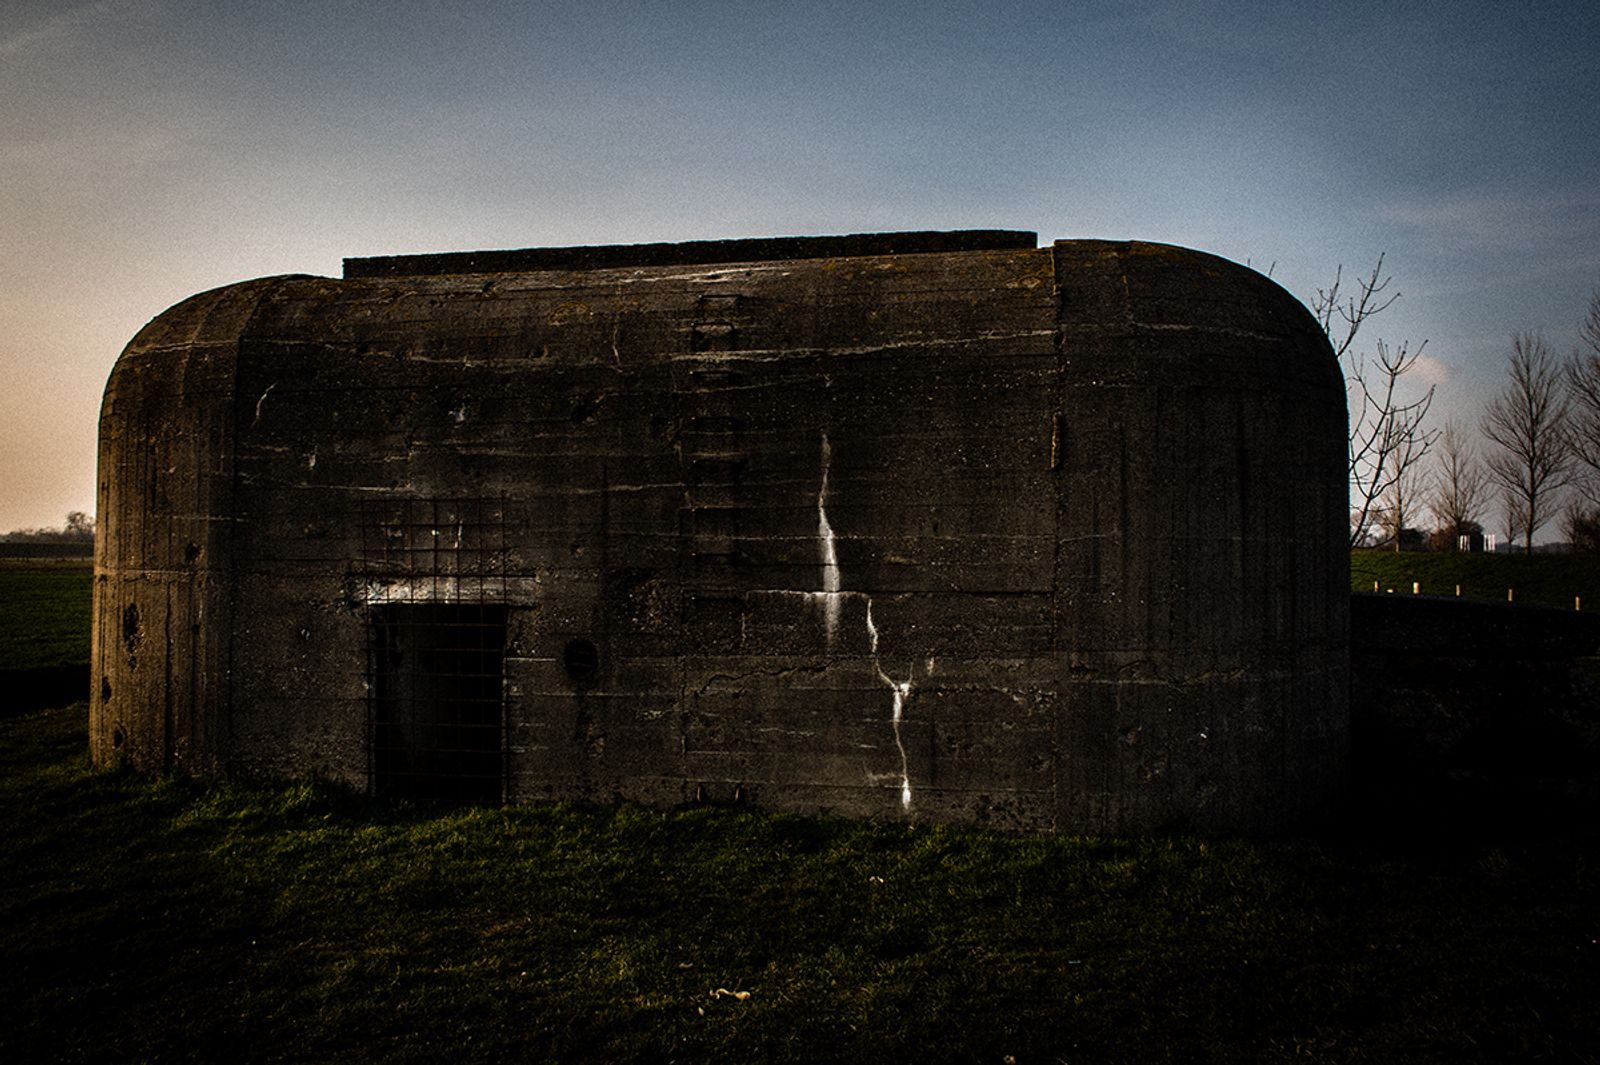 © Sarah Pabst - A bunker, left over of German occupation in Zeeland, Netherlands. They stand like silent testimonies in the landscape.